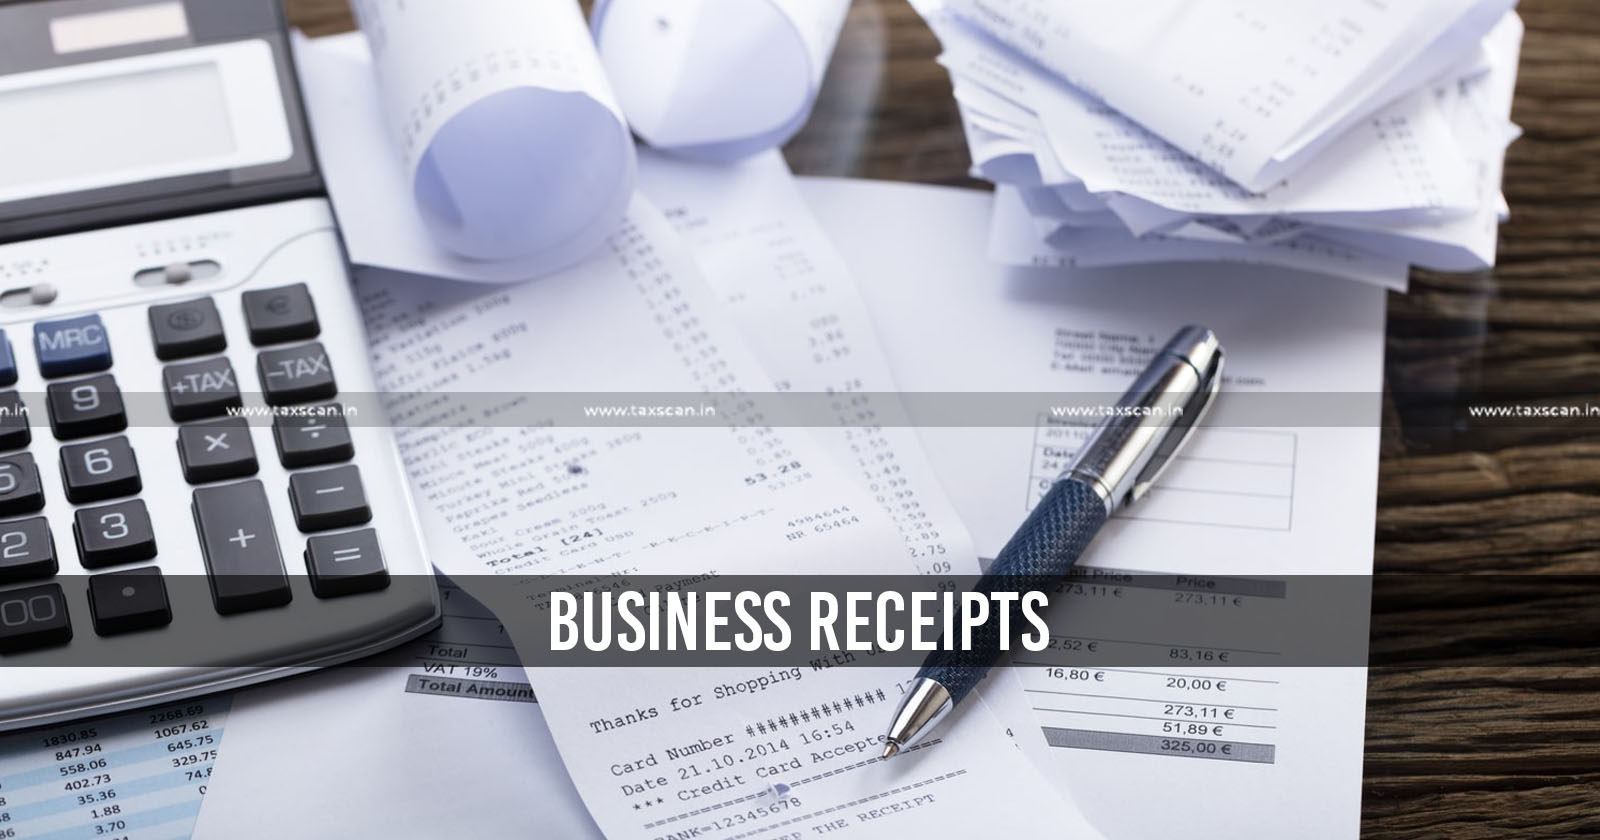 Receipts - Receipts that constitute business receipts - business receipts - unaccounted money of the assessee - unaccounted money - ITAT directs re-computation - ITAT - taxscan